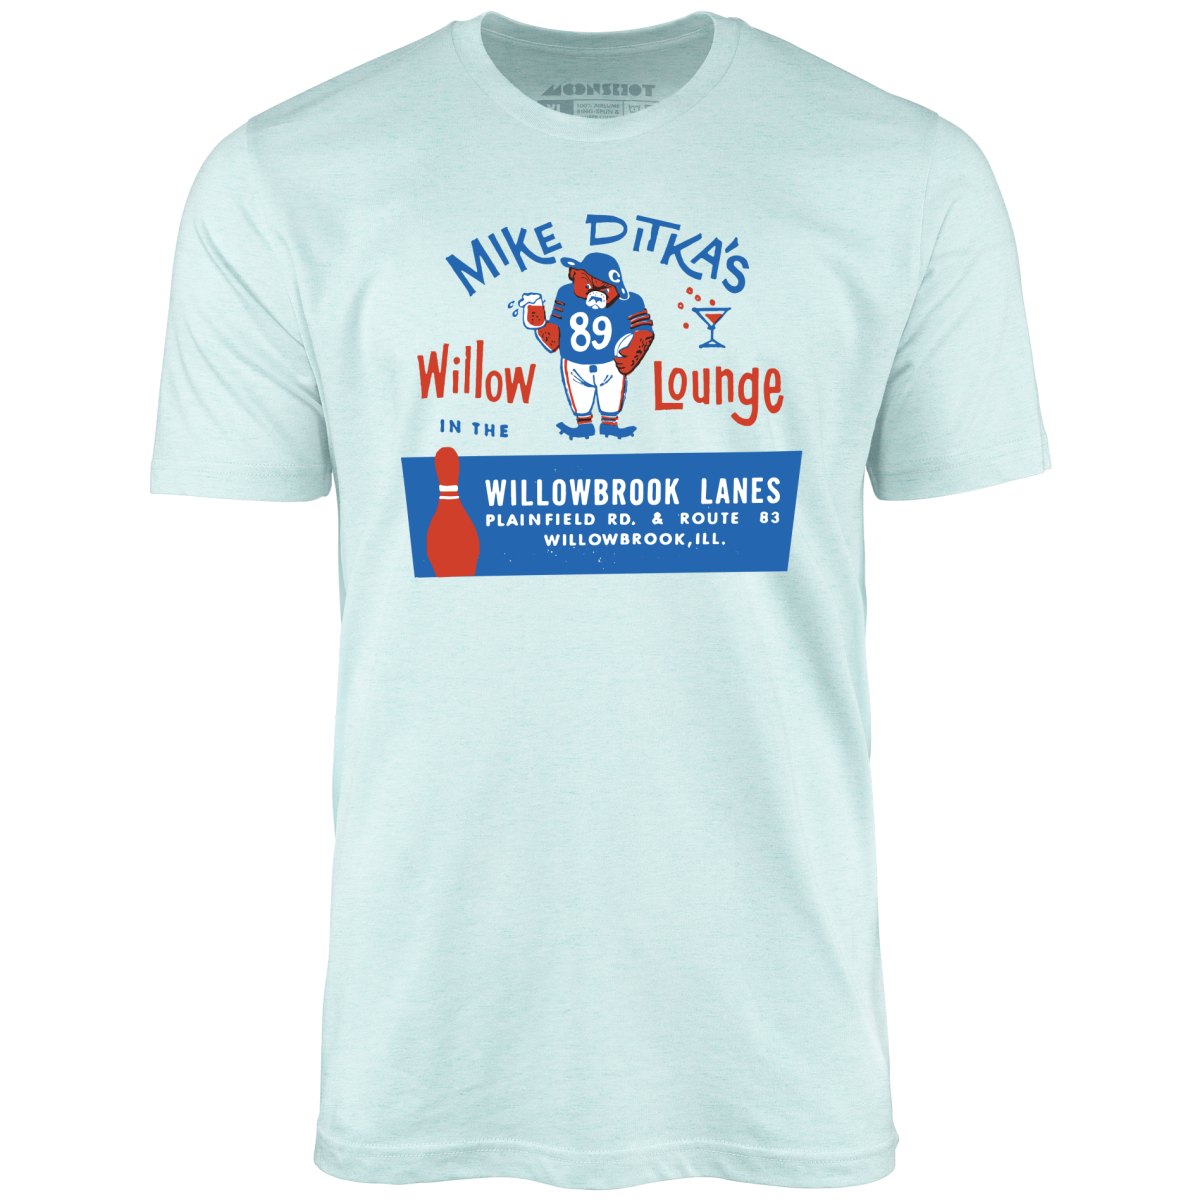 Mike Ditka's Willow Lounge - Willowbrook, IL - Vintage Bowling Alley - Unisex T-Shirt